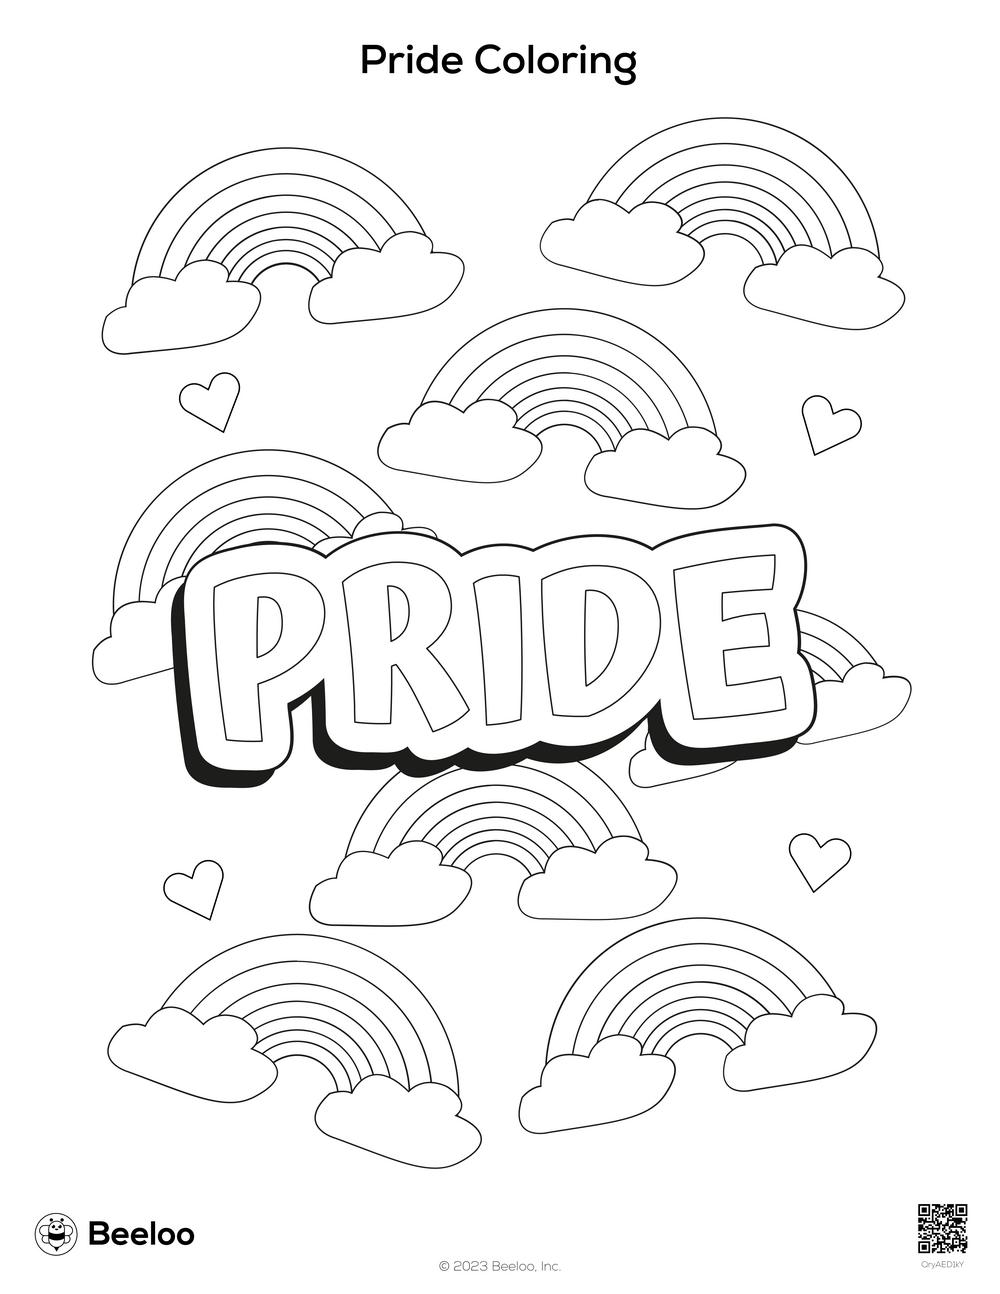 Pride coloring â printable crafts and activities for kids